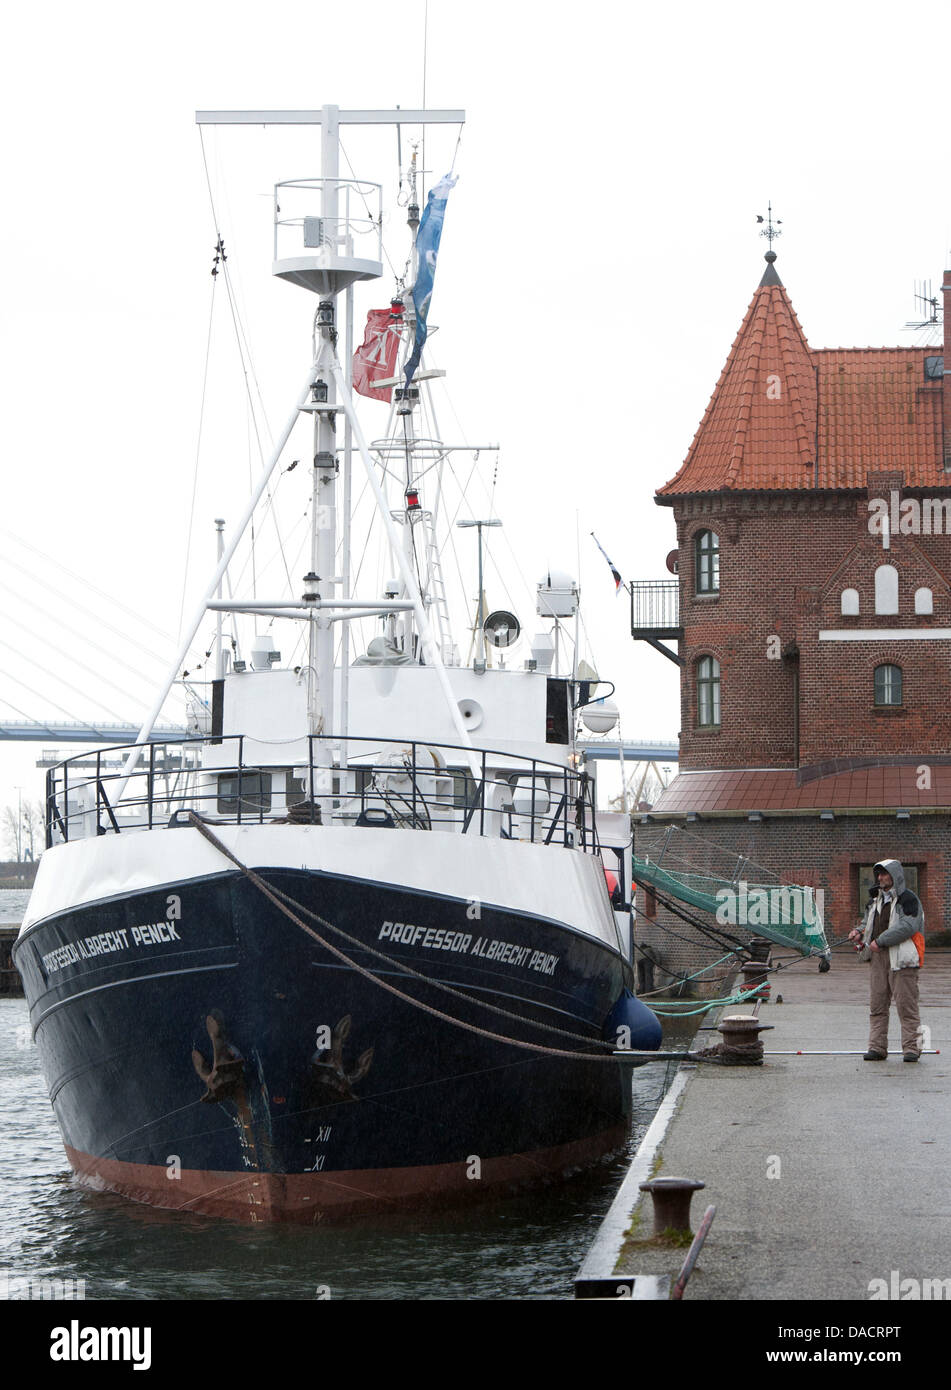 Professor Albrecht Penck, former research ship of the Leibniz Institute for Baltic Sea Research (IOW), flows in the port in Stralsund, Germany, 13 December 2011. The former research ship will be used as a classrooom by the German Oceanographic Museum during the winter months. The ship built in 1951 was put out of commission in summer 2010 and sold. It will sit in the port of Stra Stock Photo